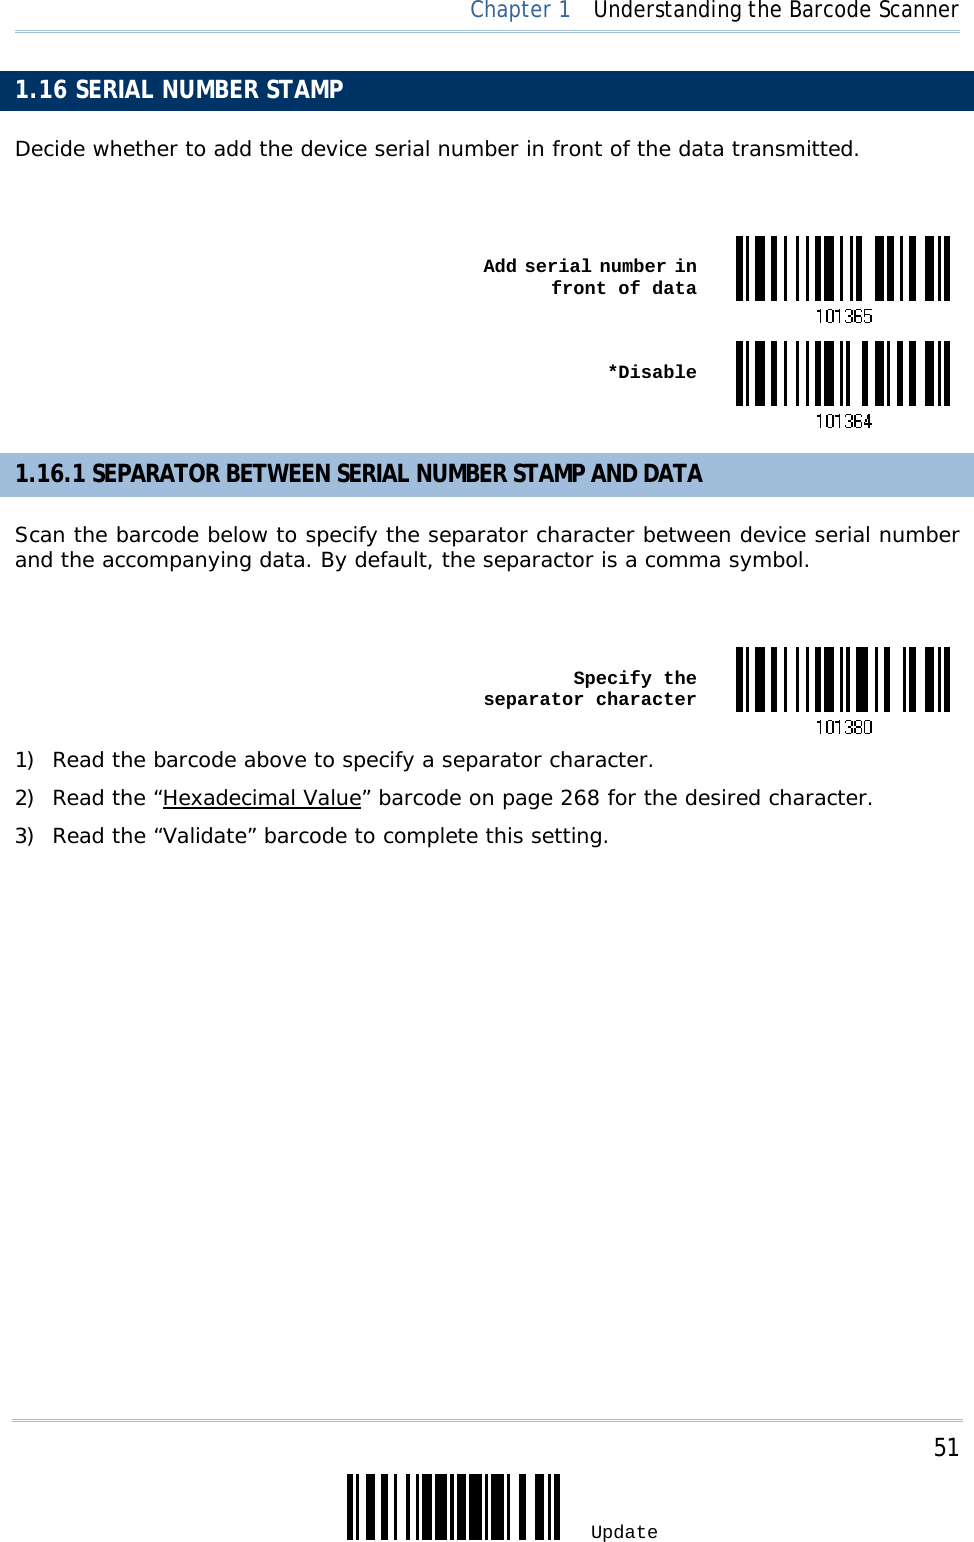     51 Update  Chapter 1  Understanding the Barcode Scanner 1.16 SERIAL NUMBER STAMP Decide whether to add the device serial number in front of the data transmitted.   Add serial number in front of data *Disable1.16.1 SEPARATOR BETWEEN SERIAL NUMBER STAMP AND DATA Scan the barcode below to specify the separator character between device serial number and the accompanying data. By default, the separactor is a comma symbol.     Specify the separator character1) Read the barcode above to specify a separator character. 2) Read the “Hexadecimal Value” barcode on page 268 for the desired character. 3) Read the “Validate” barcode to complete this setting. 